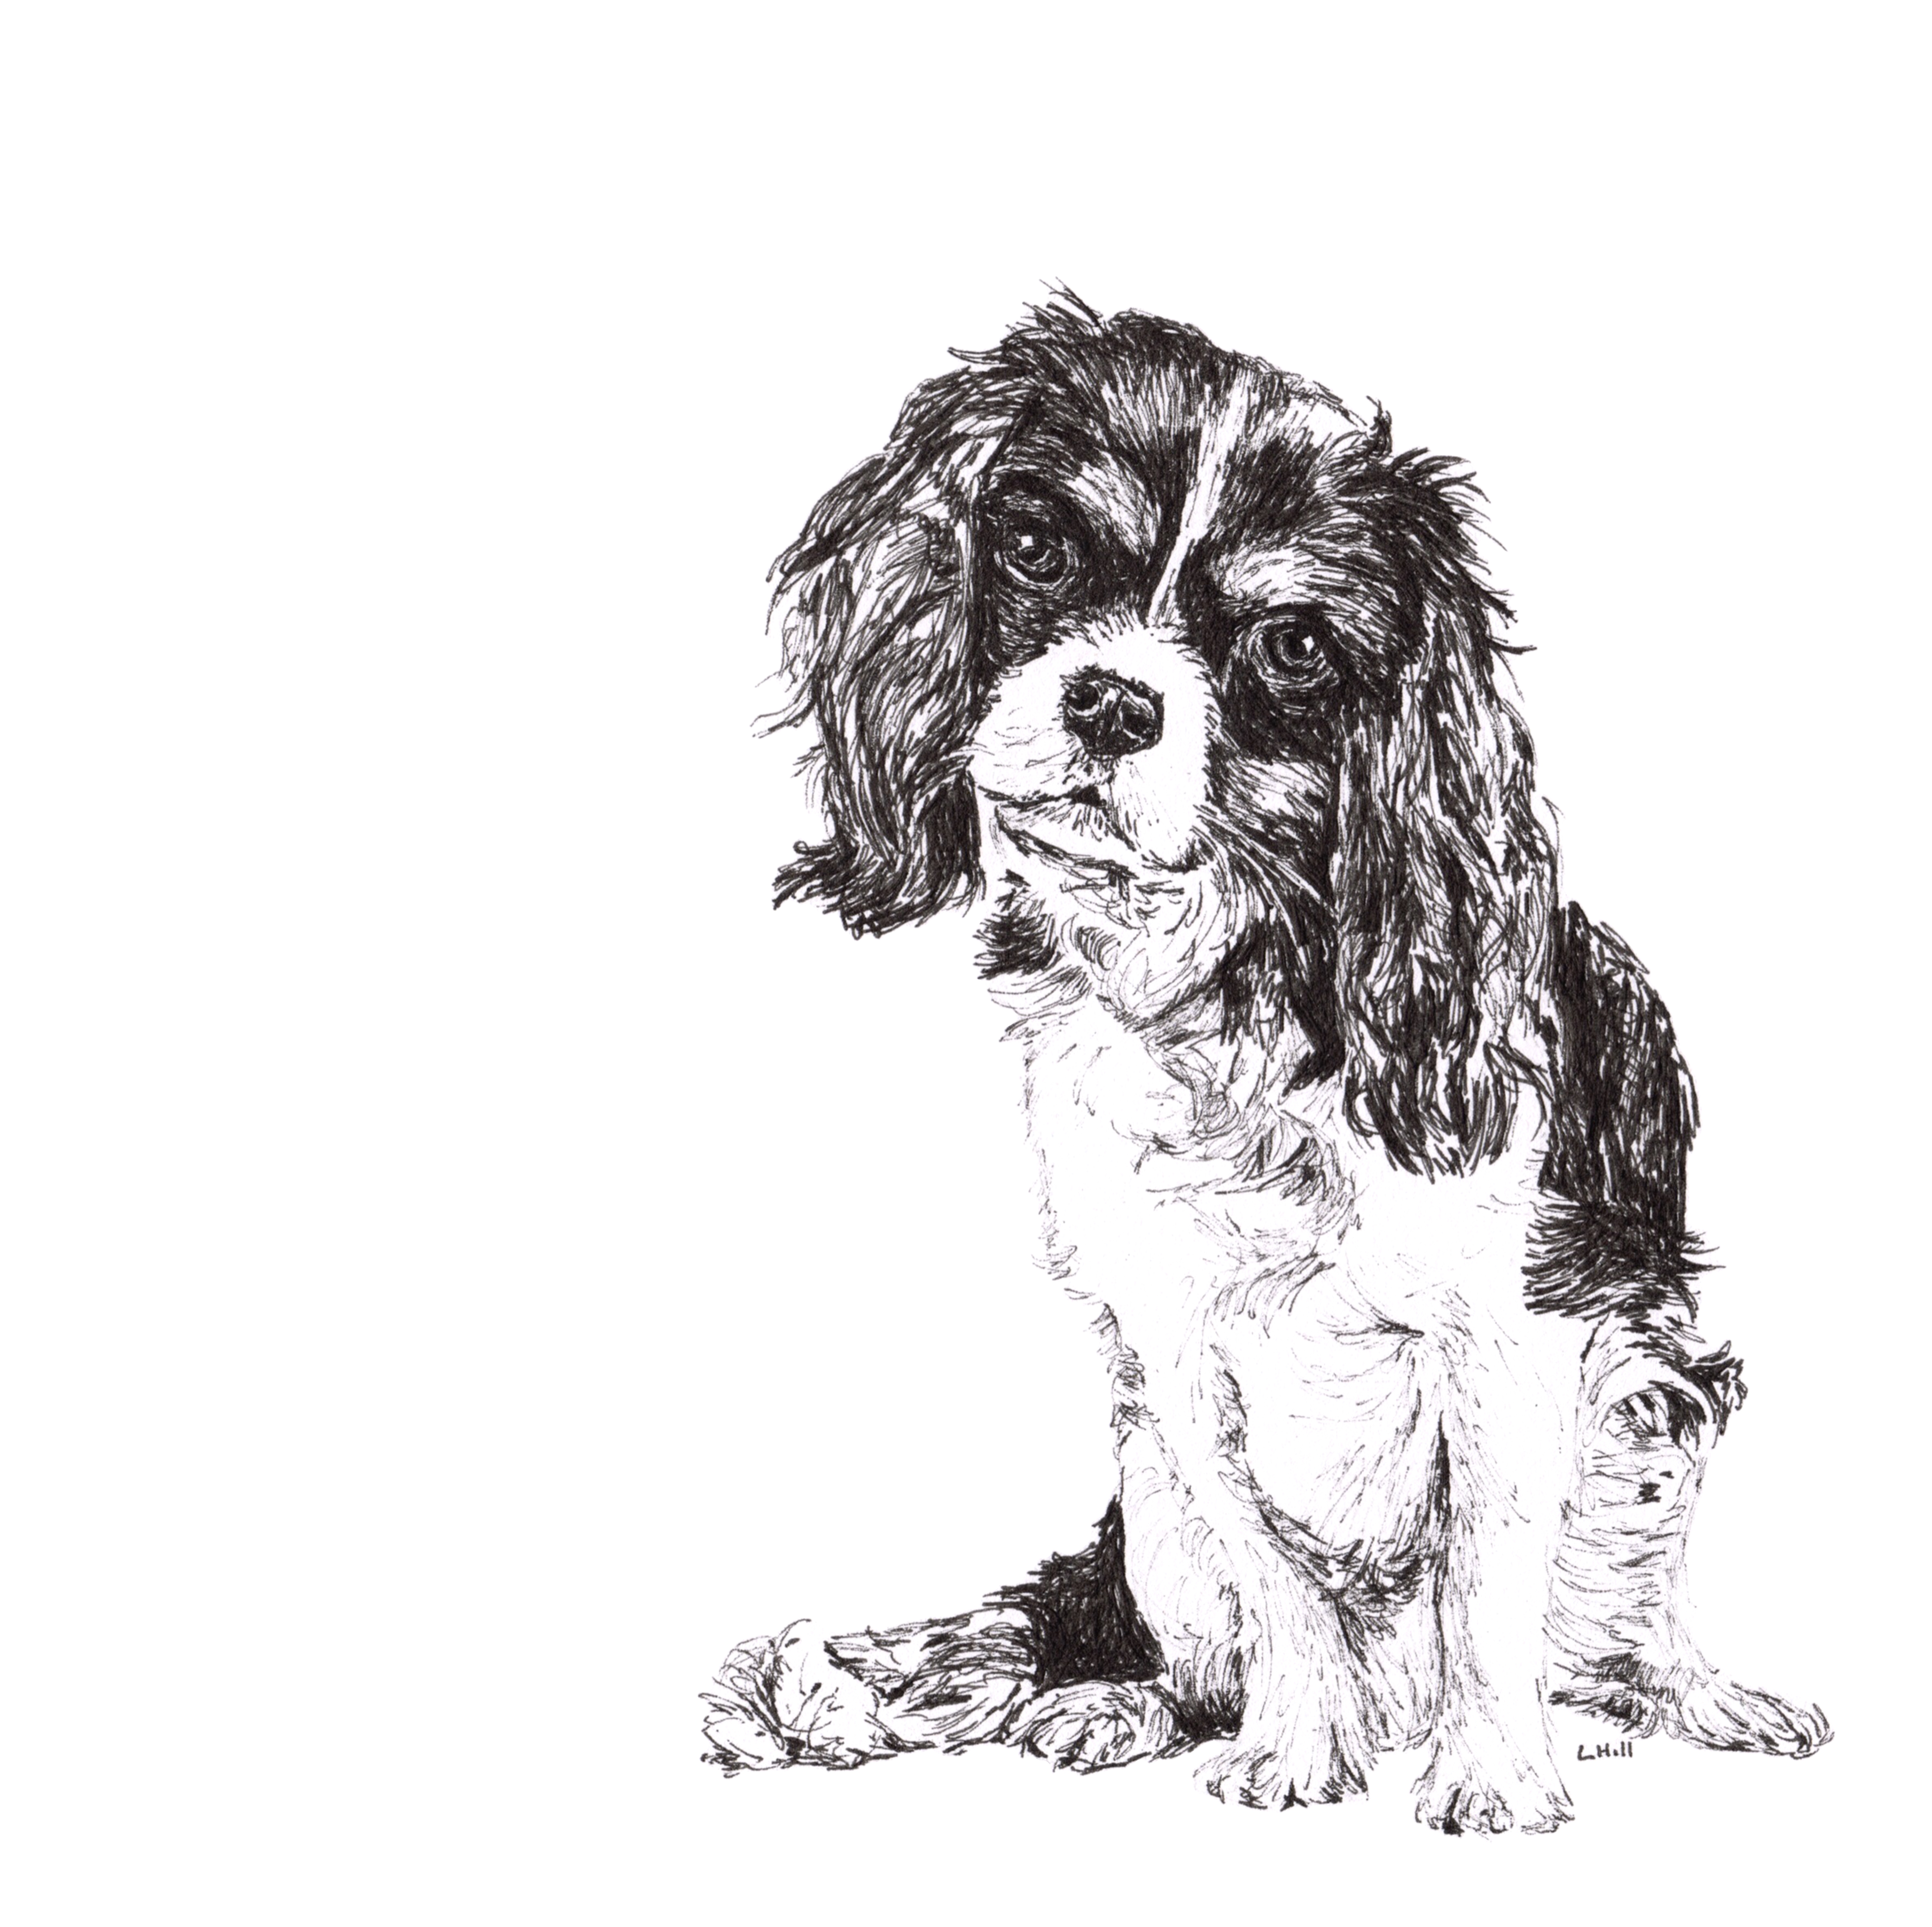 Cavalier King Charles Spaniel pen and ink illustration by Louisa Hill